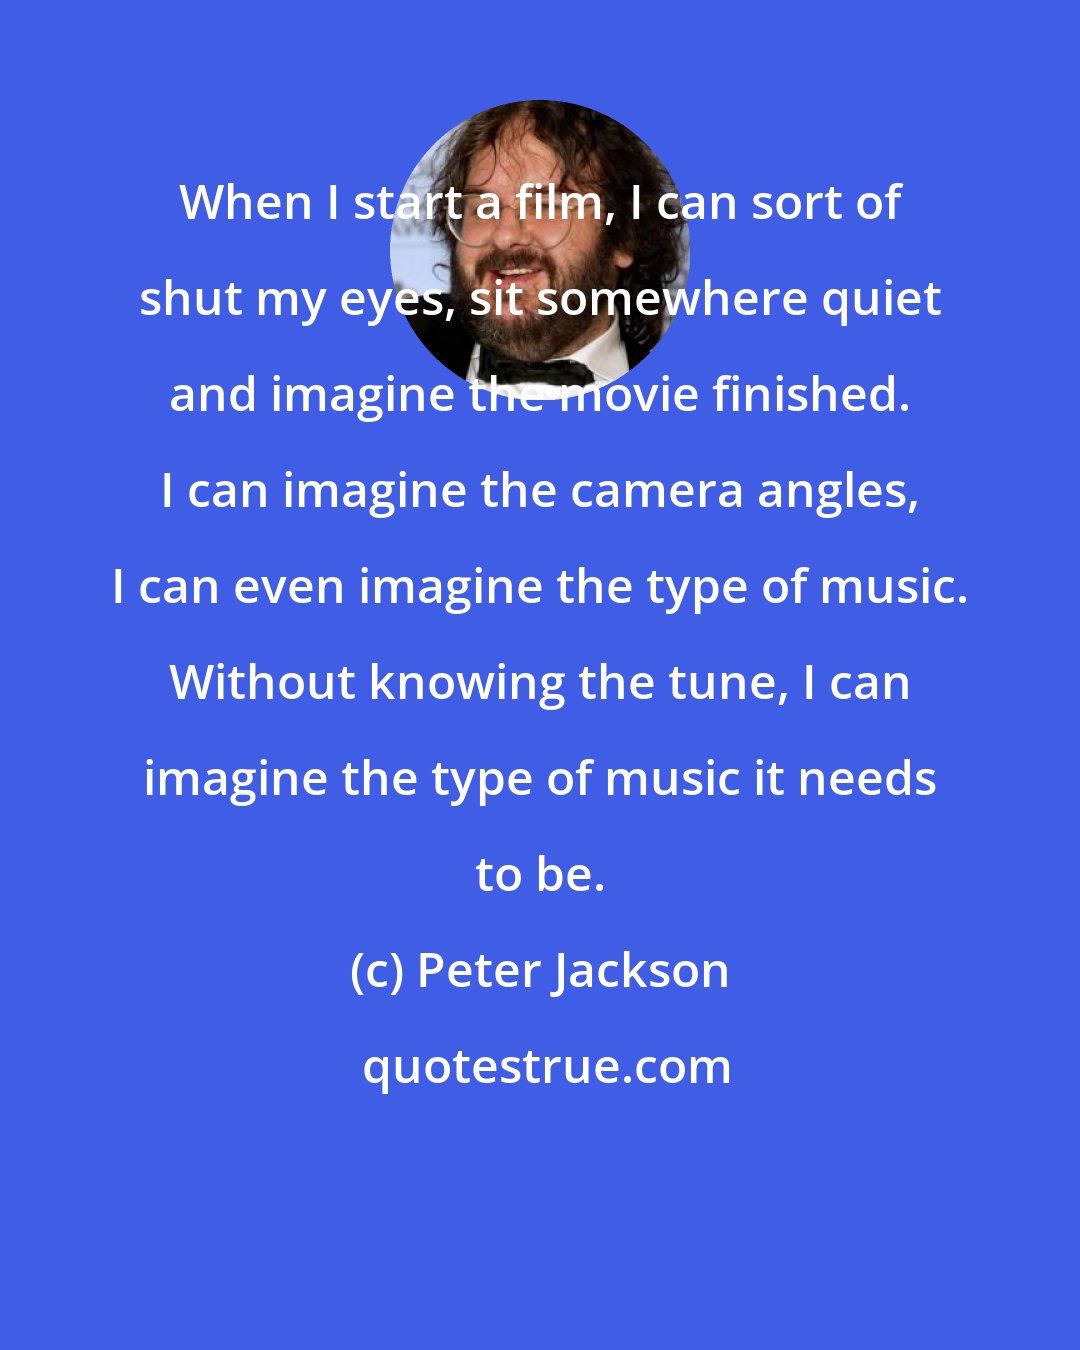 Peter Jackson: When I start a film, I can sort of shut my eyes, sit somewhere quiet and imagine the movie finished. I can imagine the camera angles, I can even imagine the type of music. Without knowing the tune, I can imagine the type of music it needs to be.